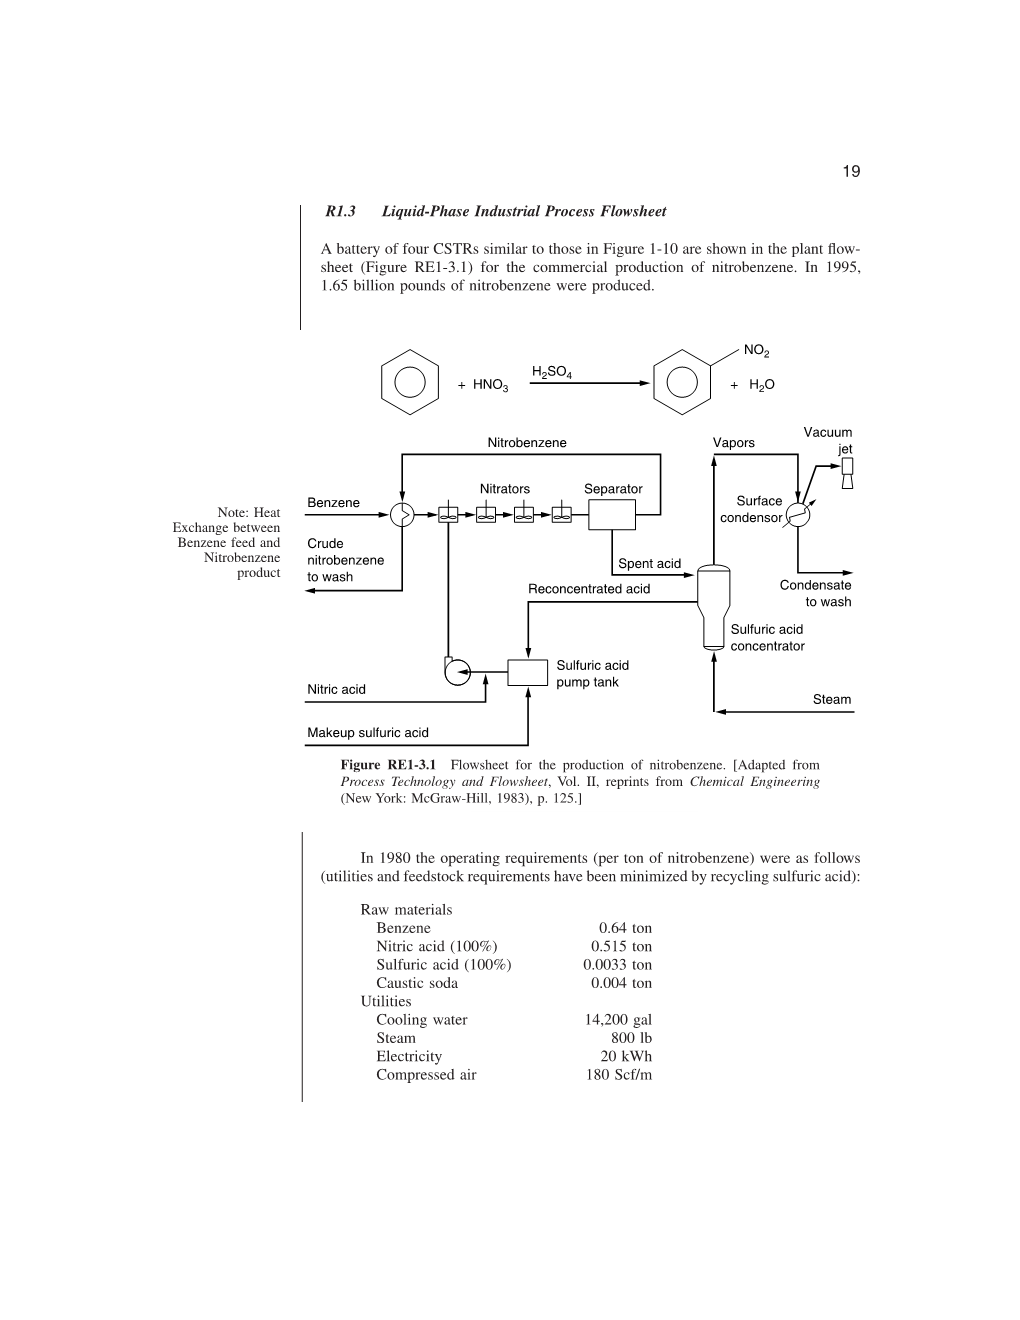 R1.3 Liquid-Phase Industrial Process Flowsheet a Battery of Four Cstrs